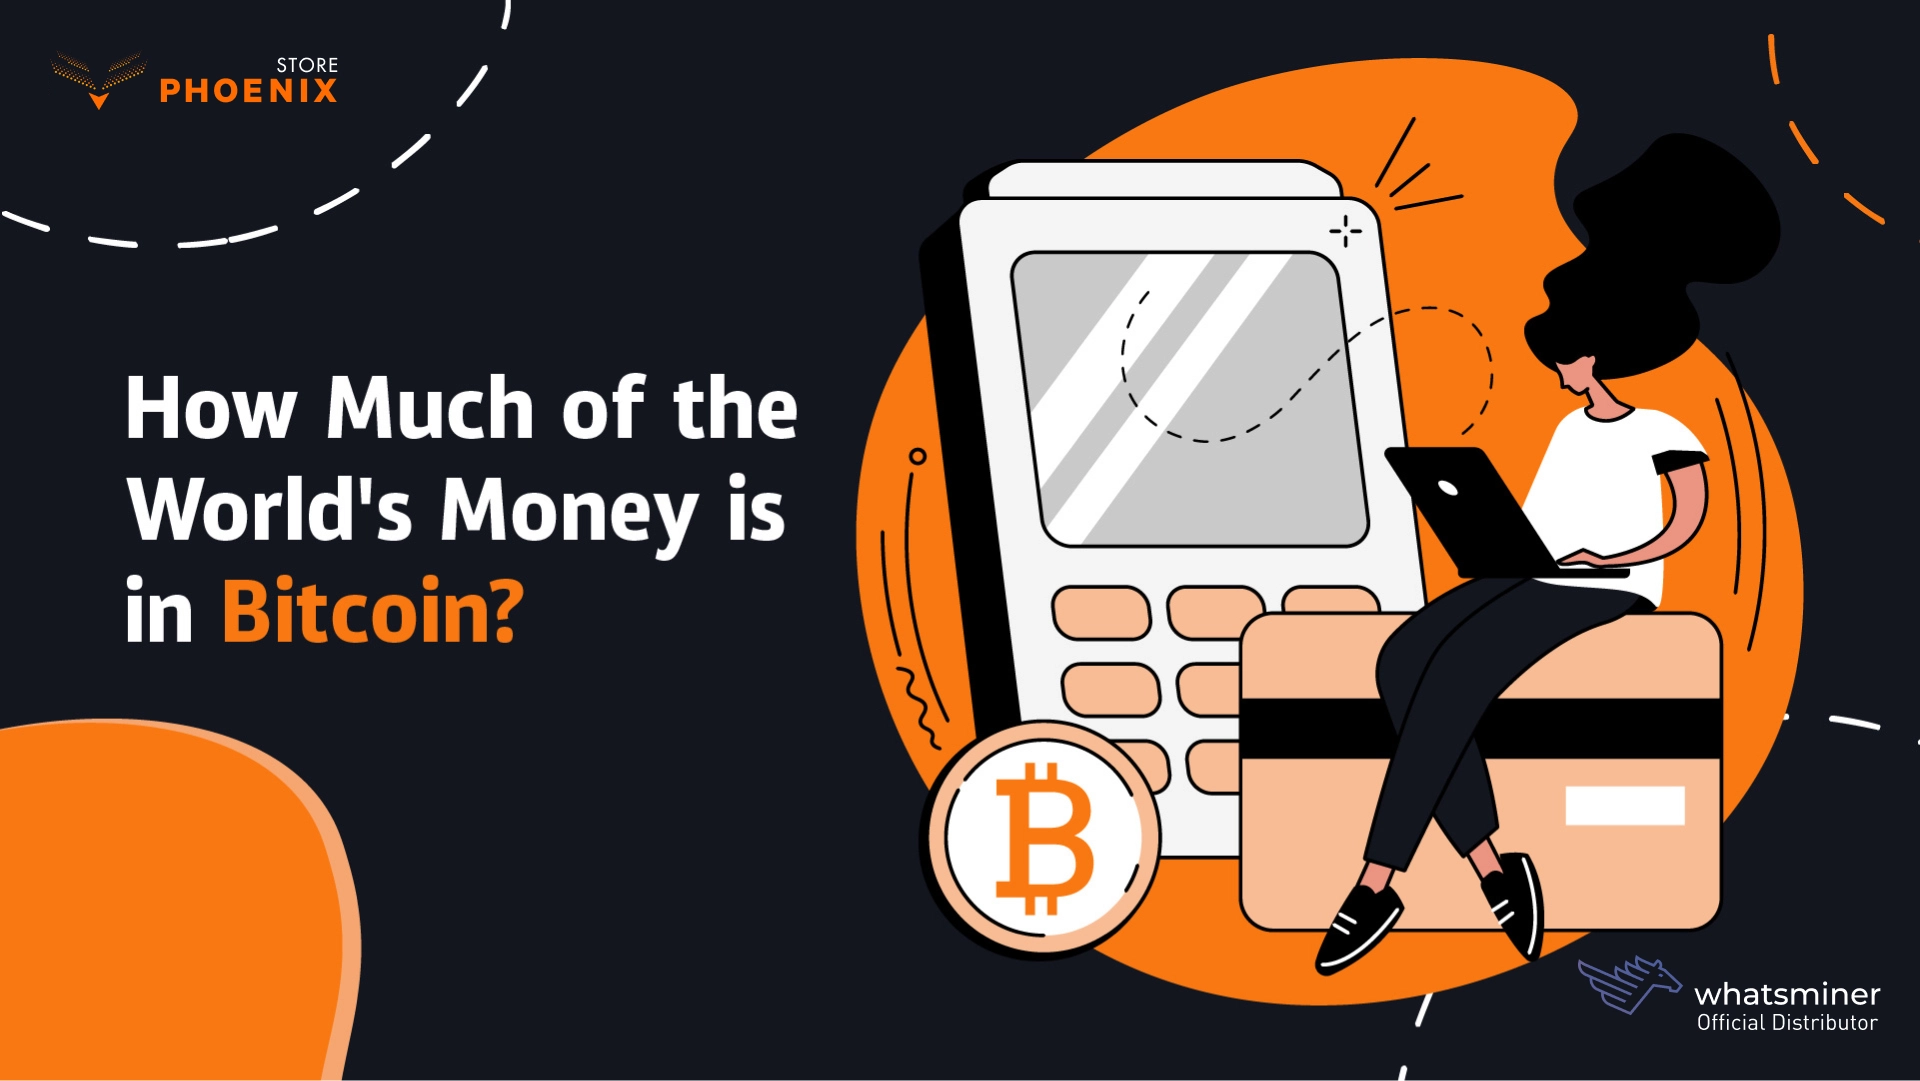 How Much of the World’s Money is in Bitcoin?